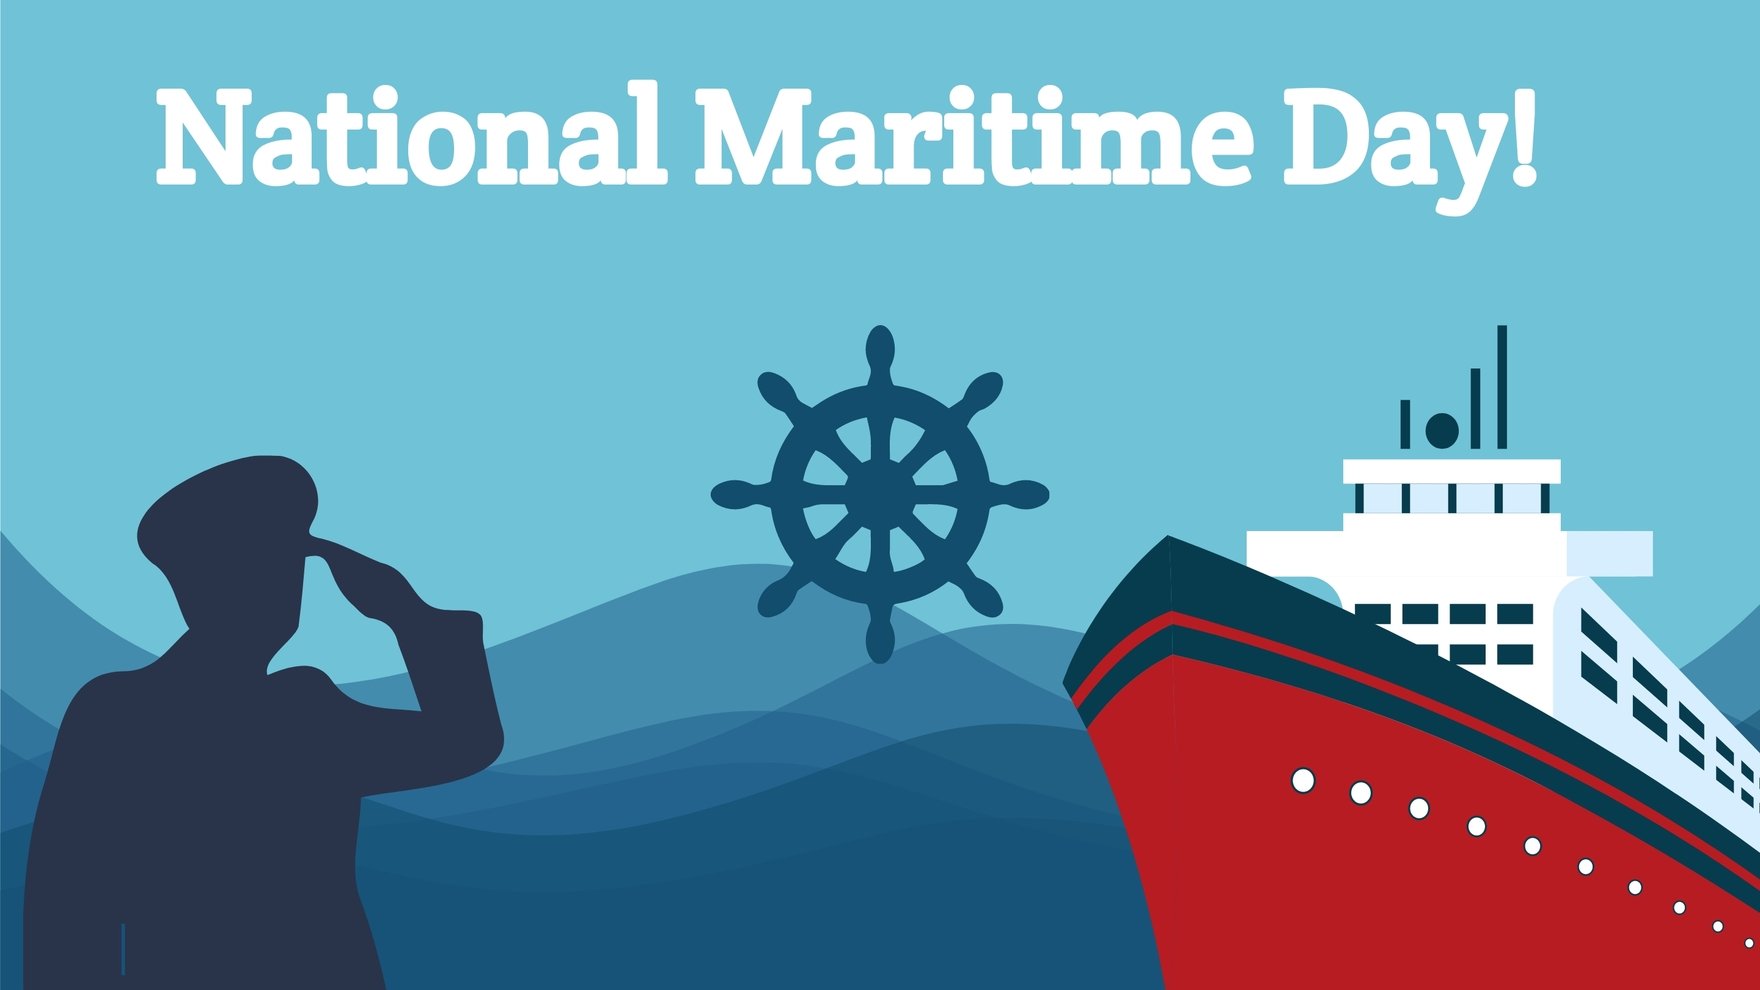 Free National Maritime Day Vector Background in PDF, Illustrator, PSD, EPS, SVG, JPG, PNG